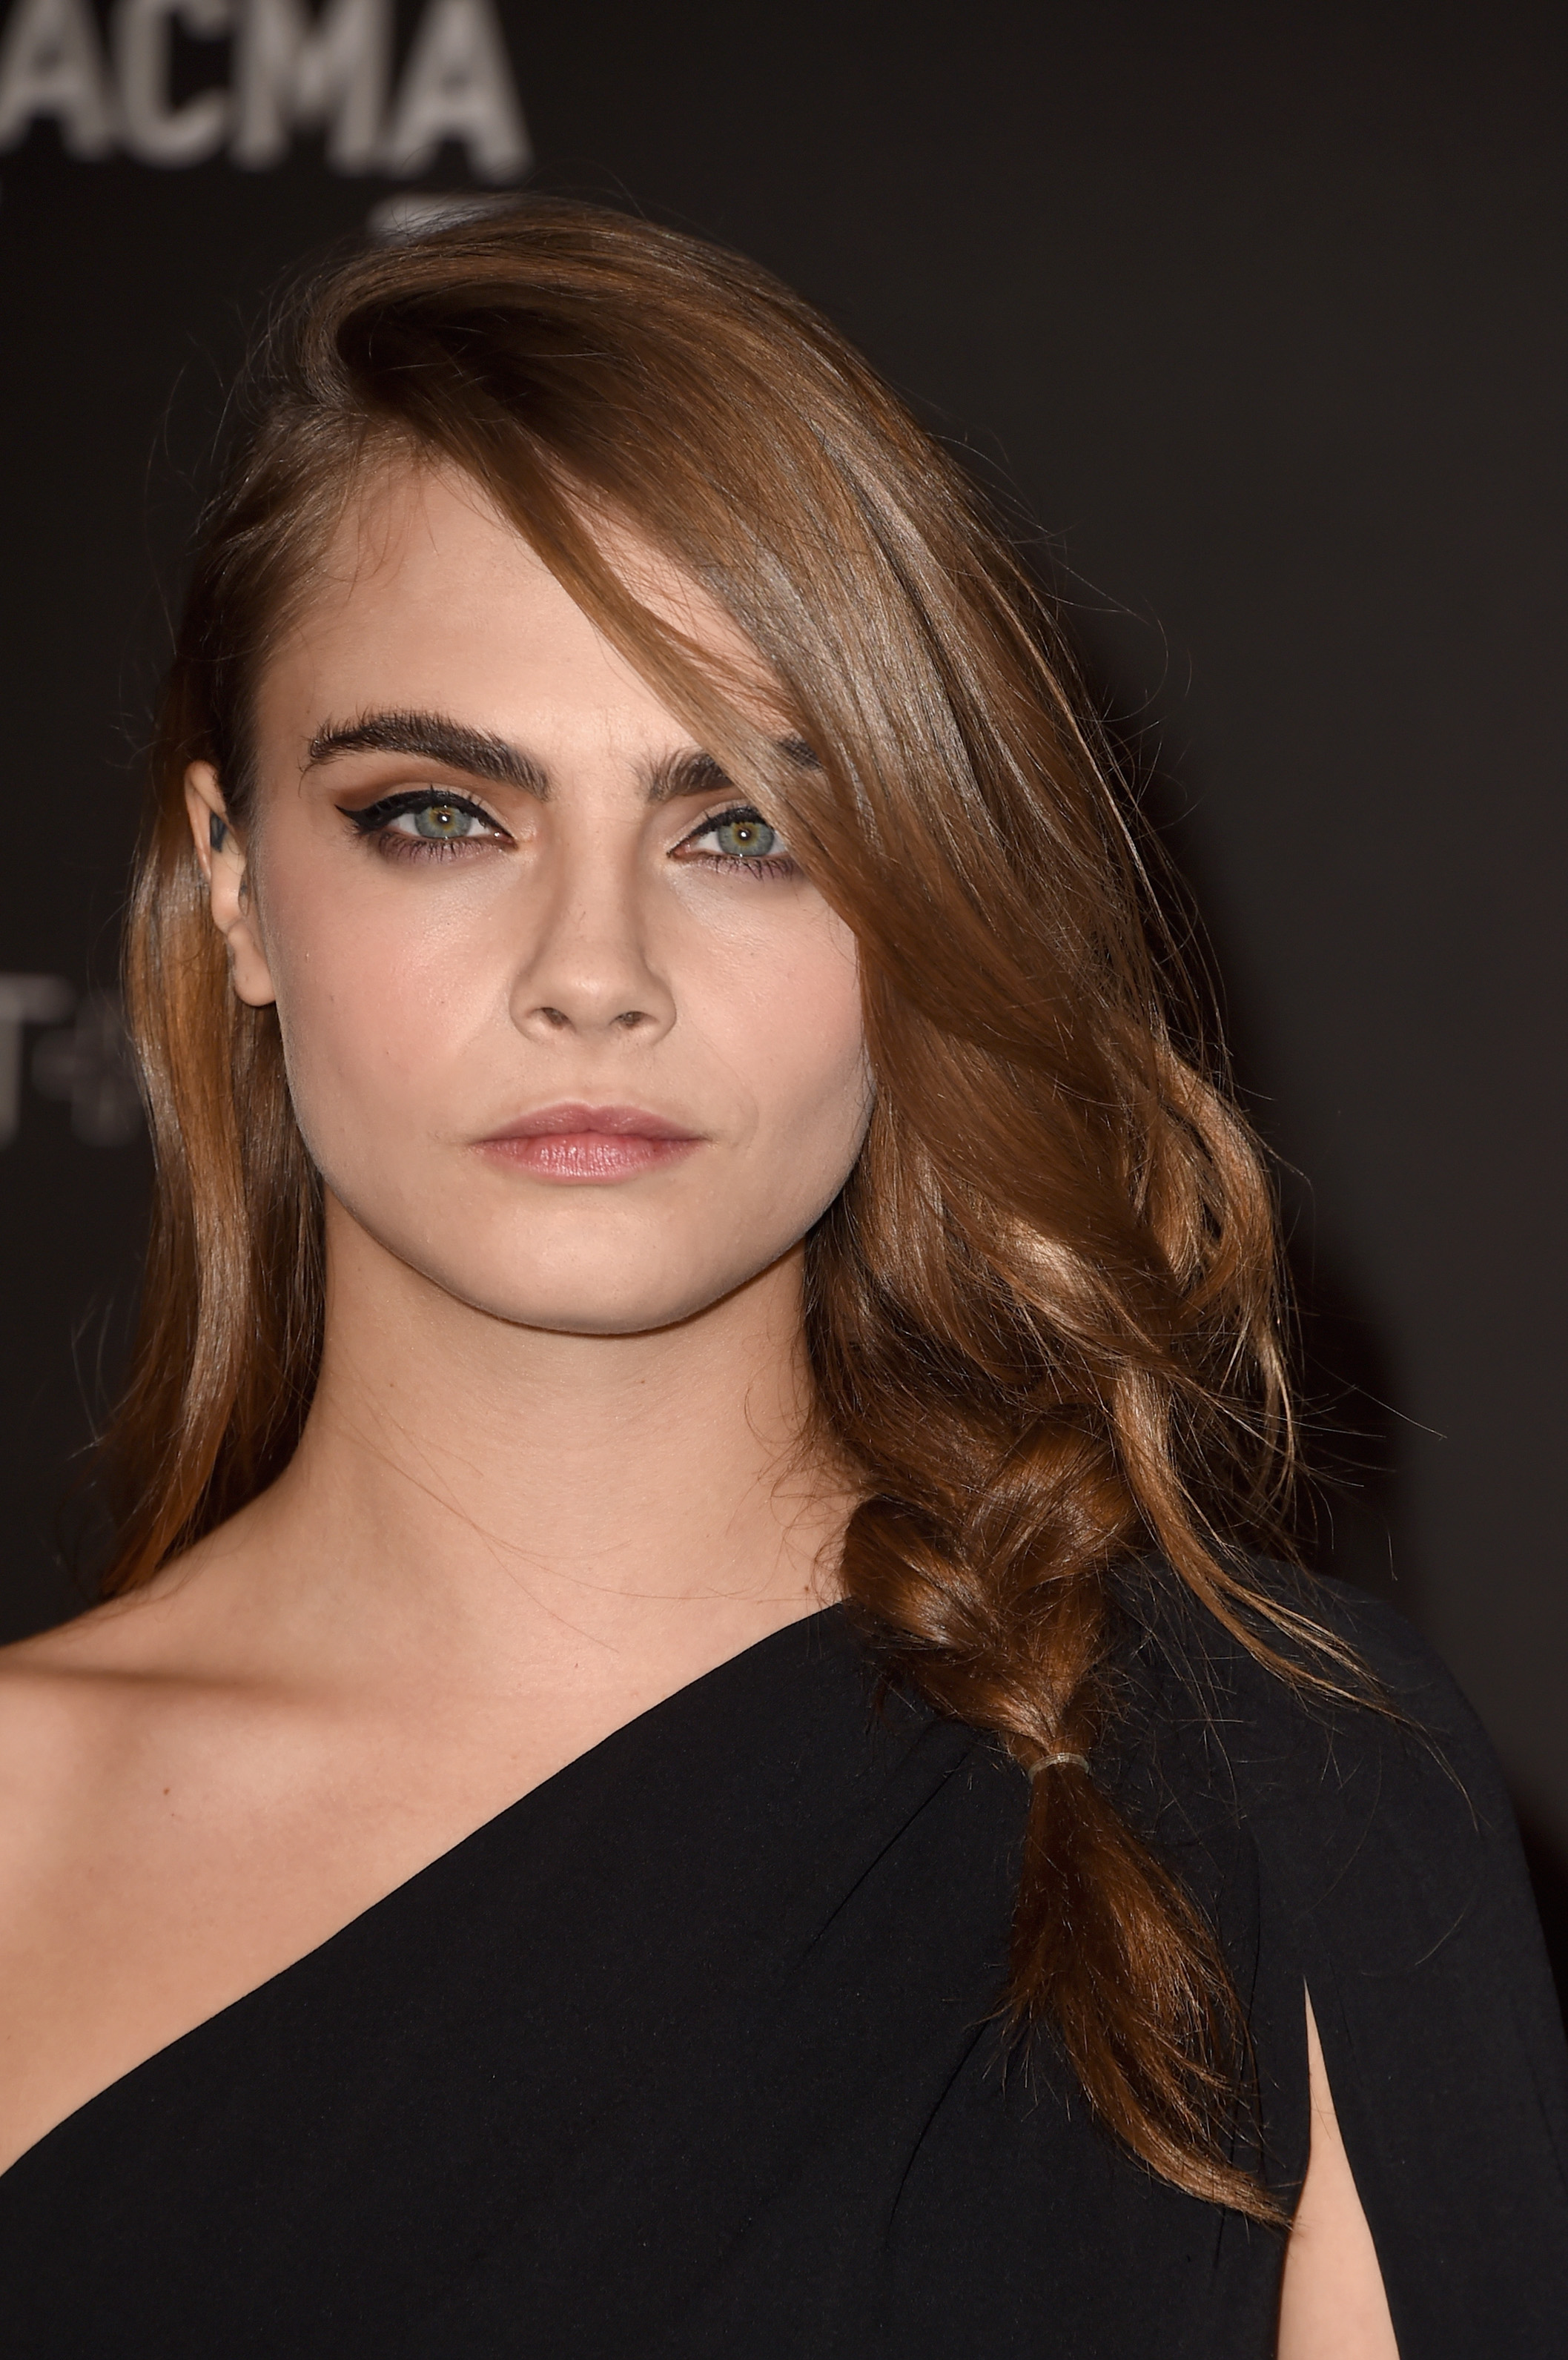 Cara Delevingne Dyes Her Hair Brown: See Pictures of the New Brunette